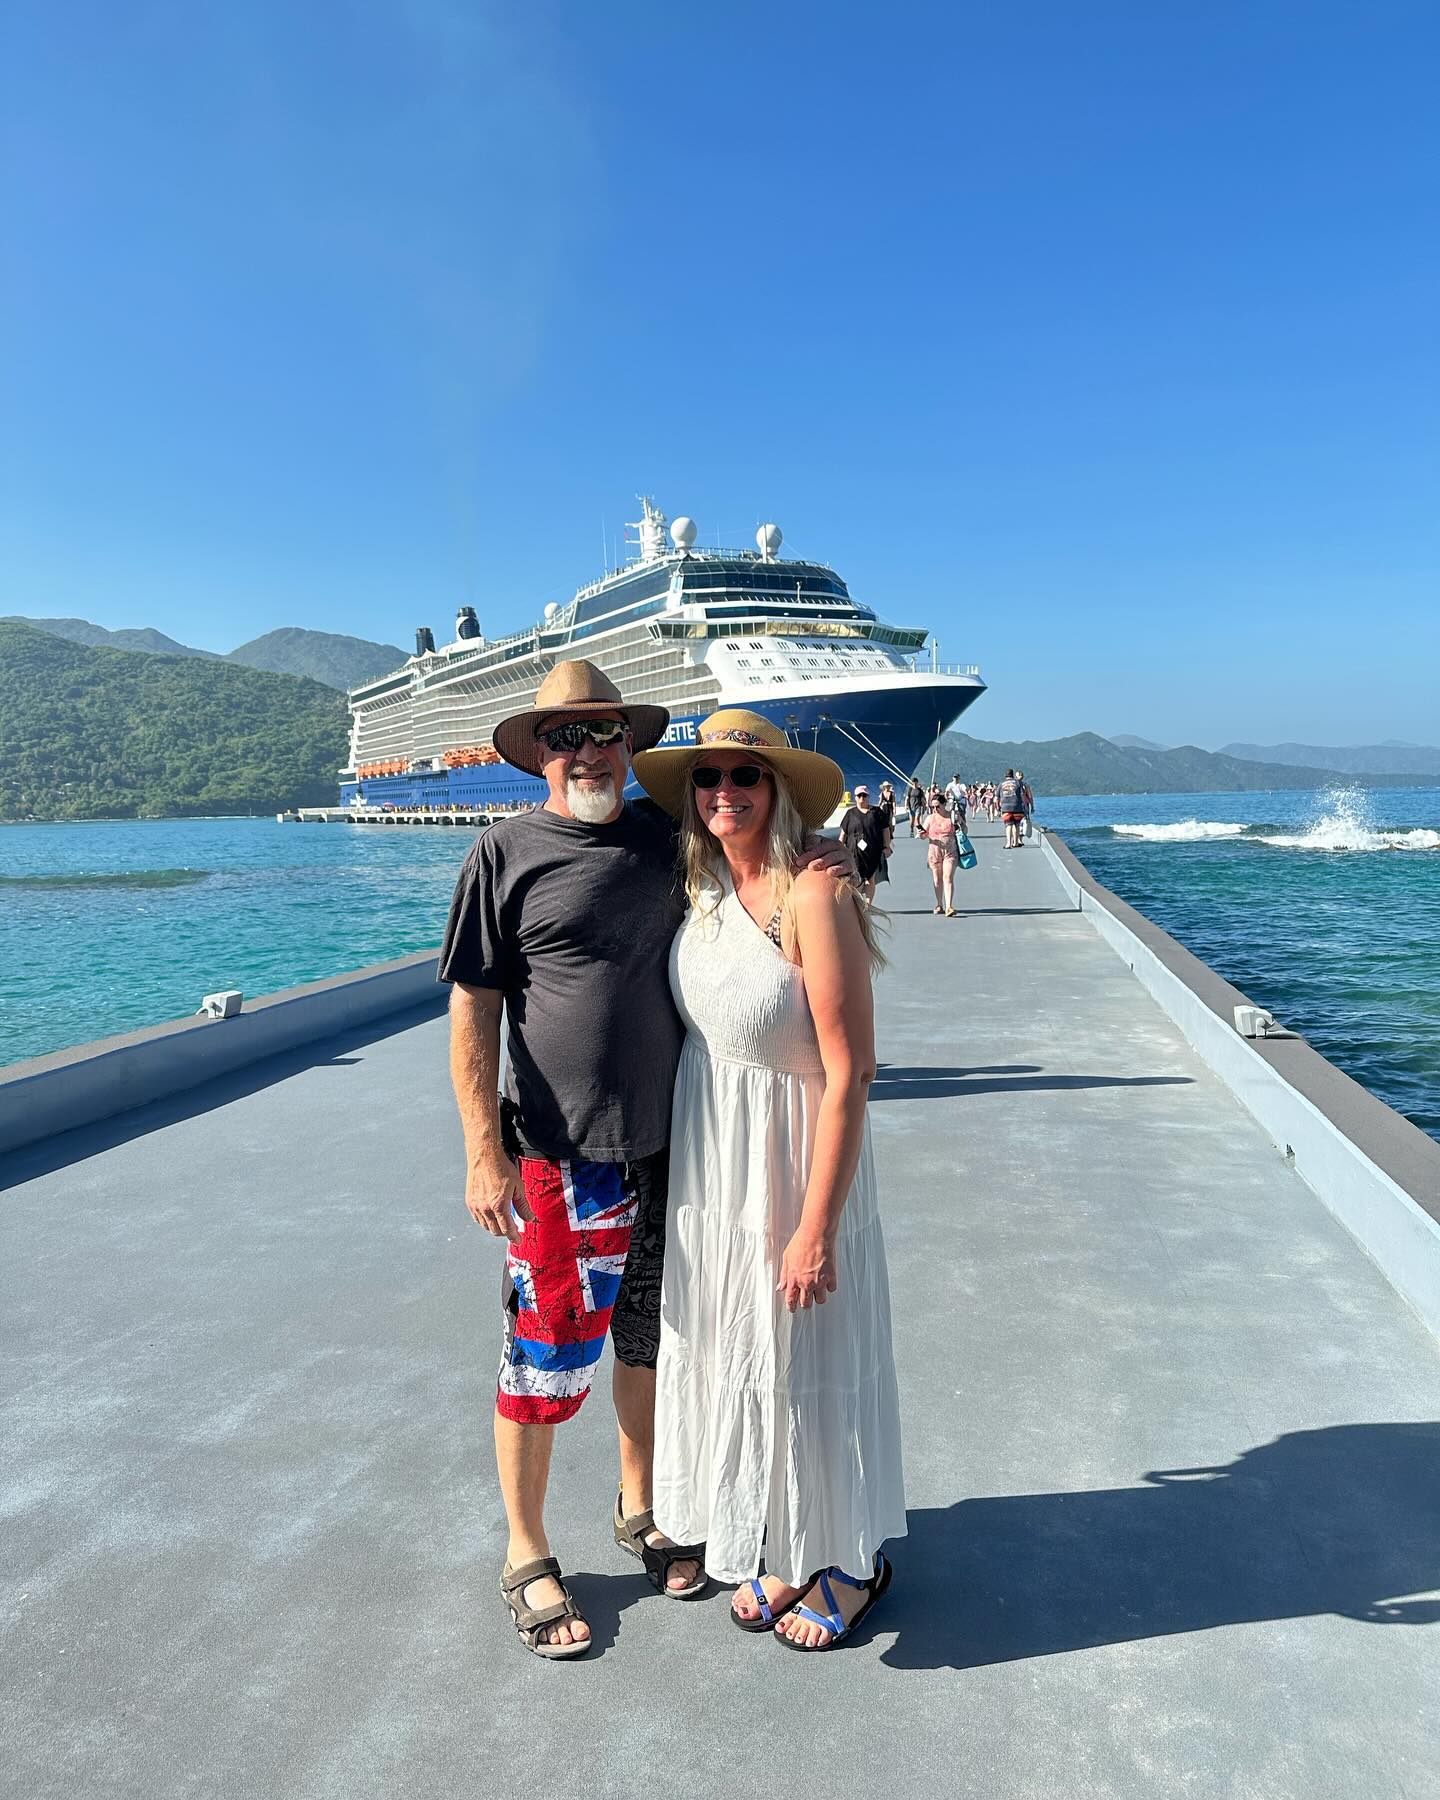 David captioned the post: 'Holy Hell! My wife is smokin! Having a blast on a cruise with her. I’m teaching her how to let loose!'